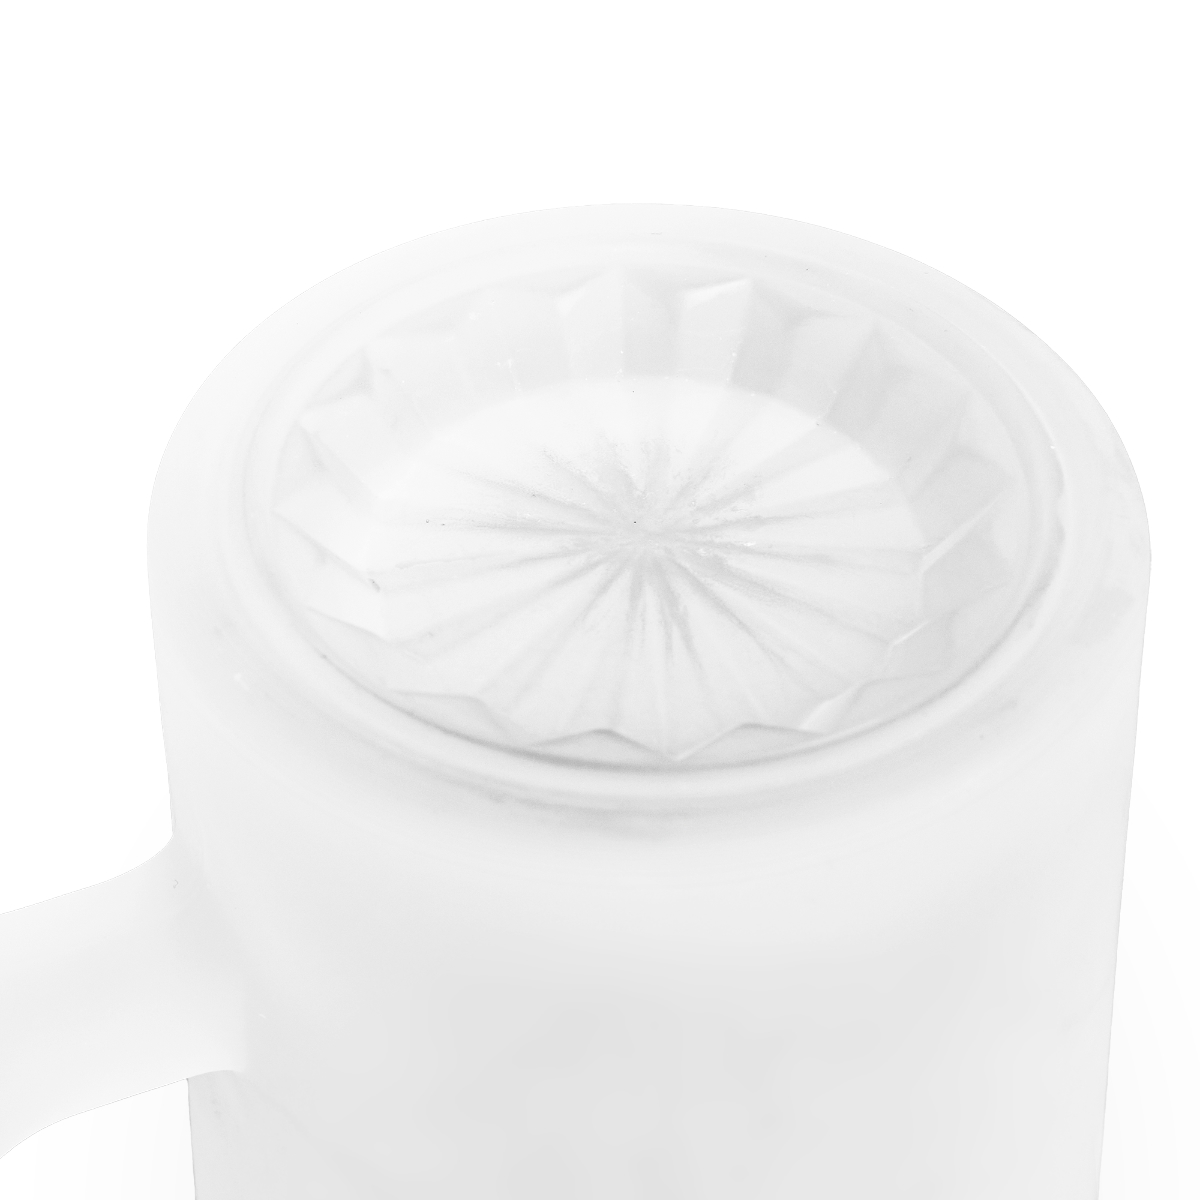 Frosted Glass Beer Mug product thumbnail image